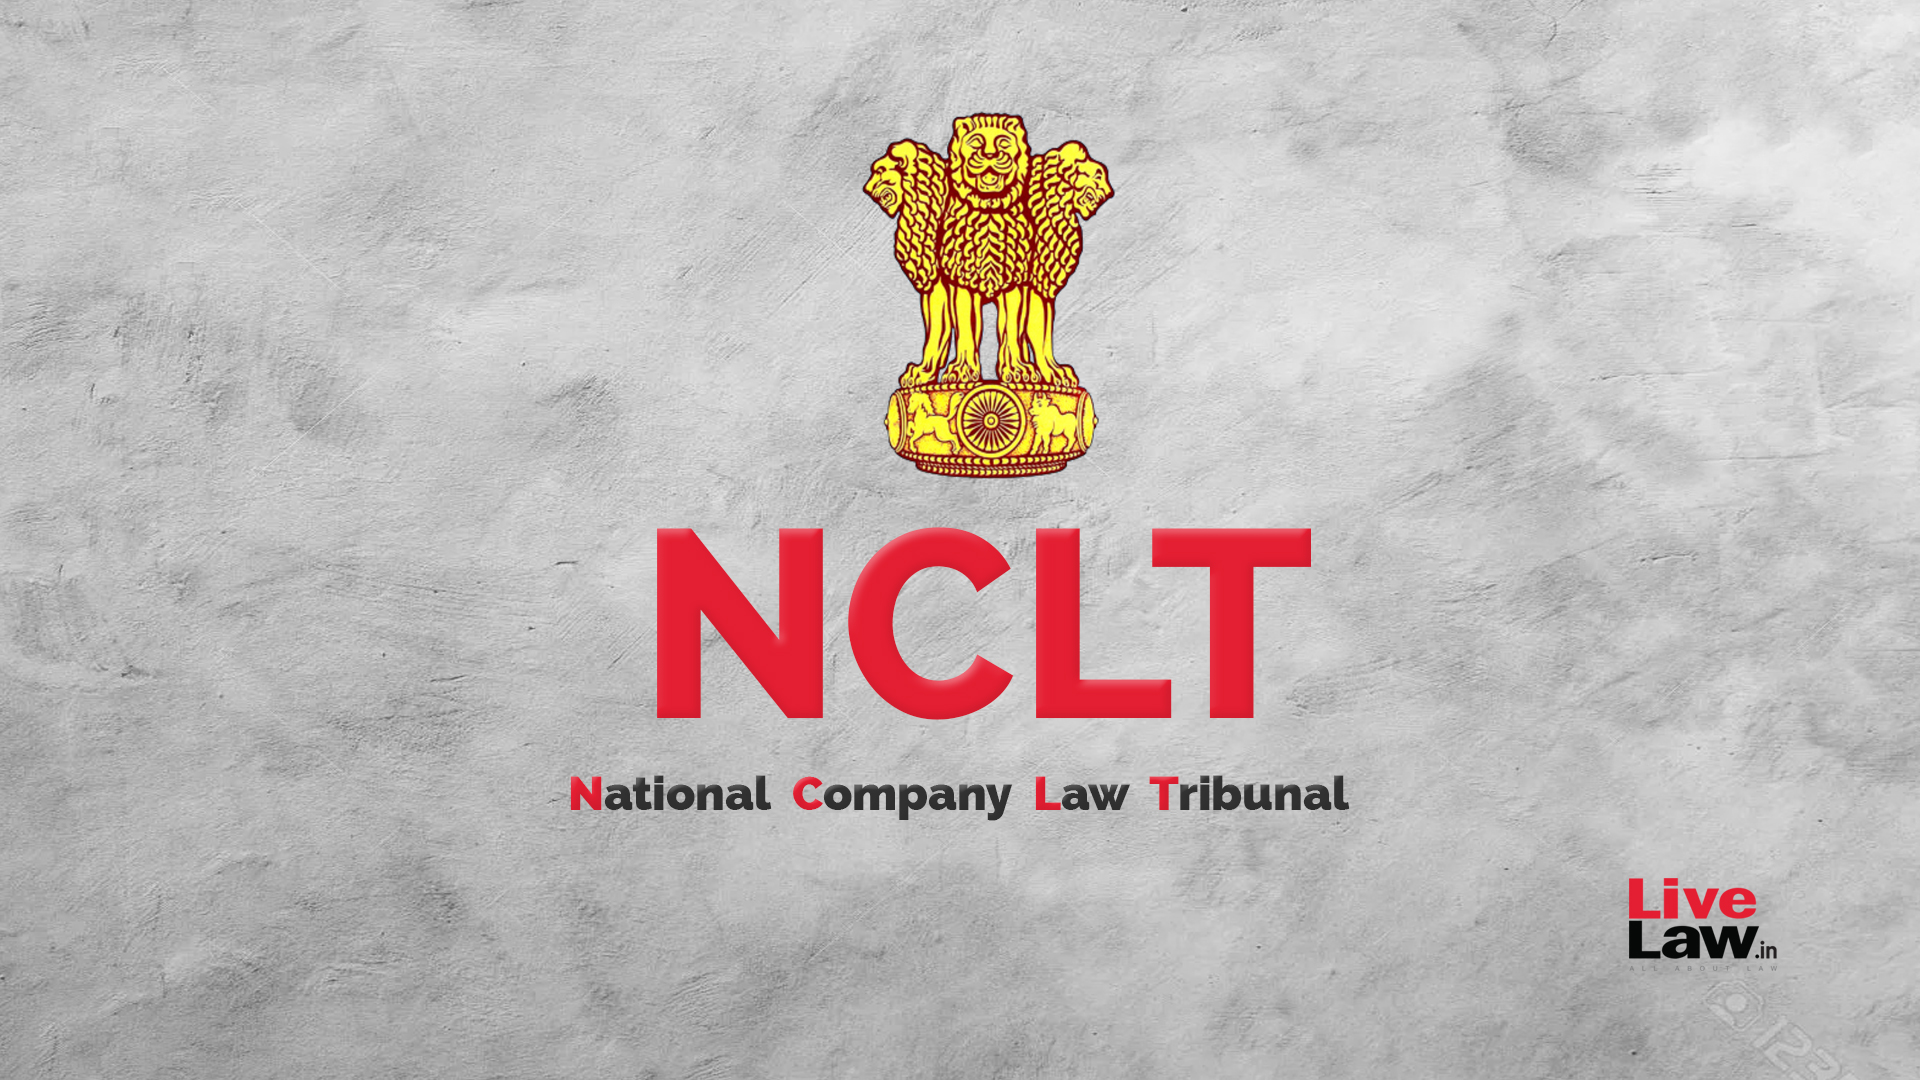 Personal Guarantors Of NBFC/FSC Cannot Be Proceeded Against Unless Threshold Of Rs. 500 Cr Is Satisfied: NCLT, Jaipur